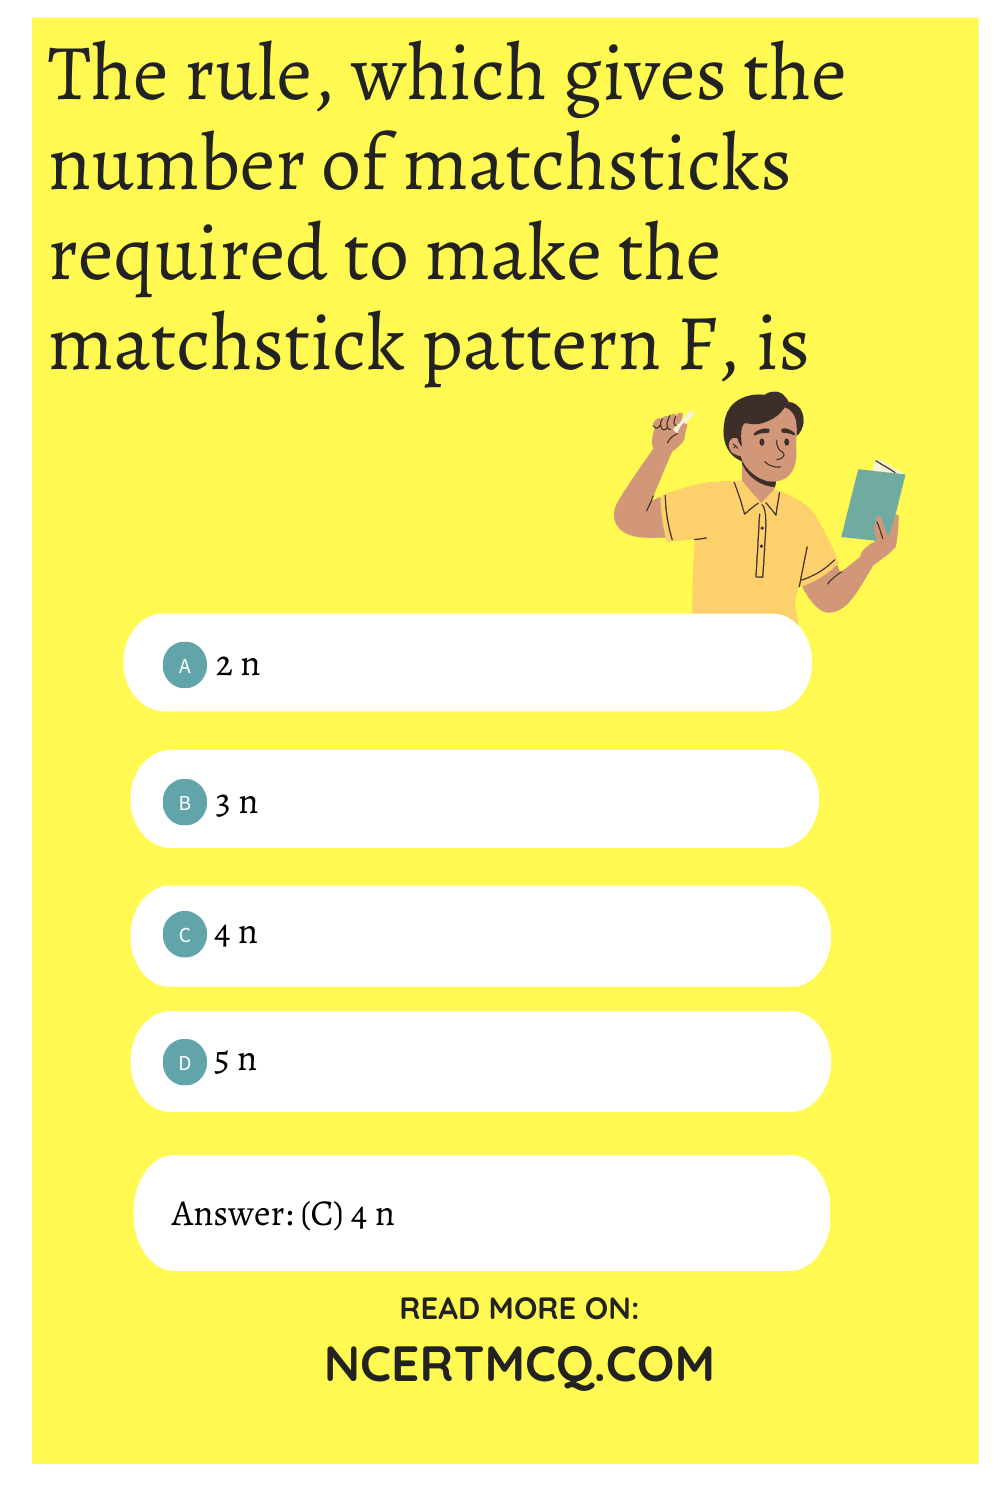 The rule, which gives the number of matchsticks required to make the matchstick pattern F, is